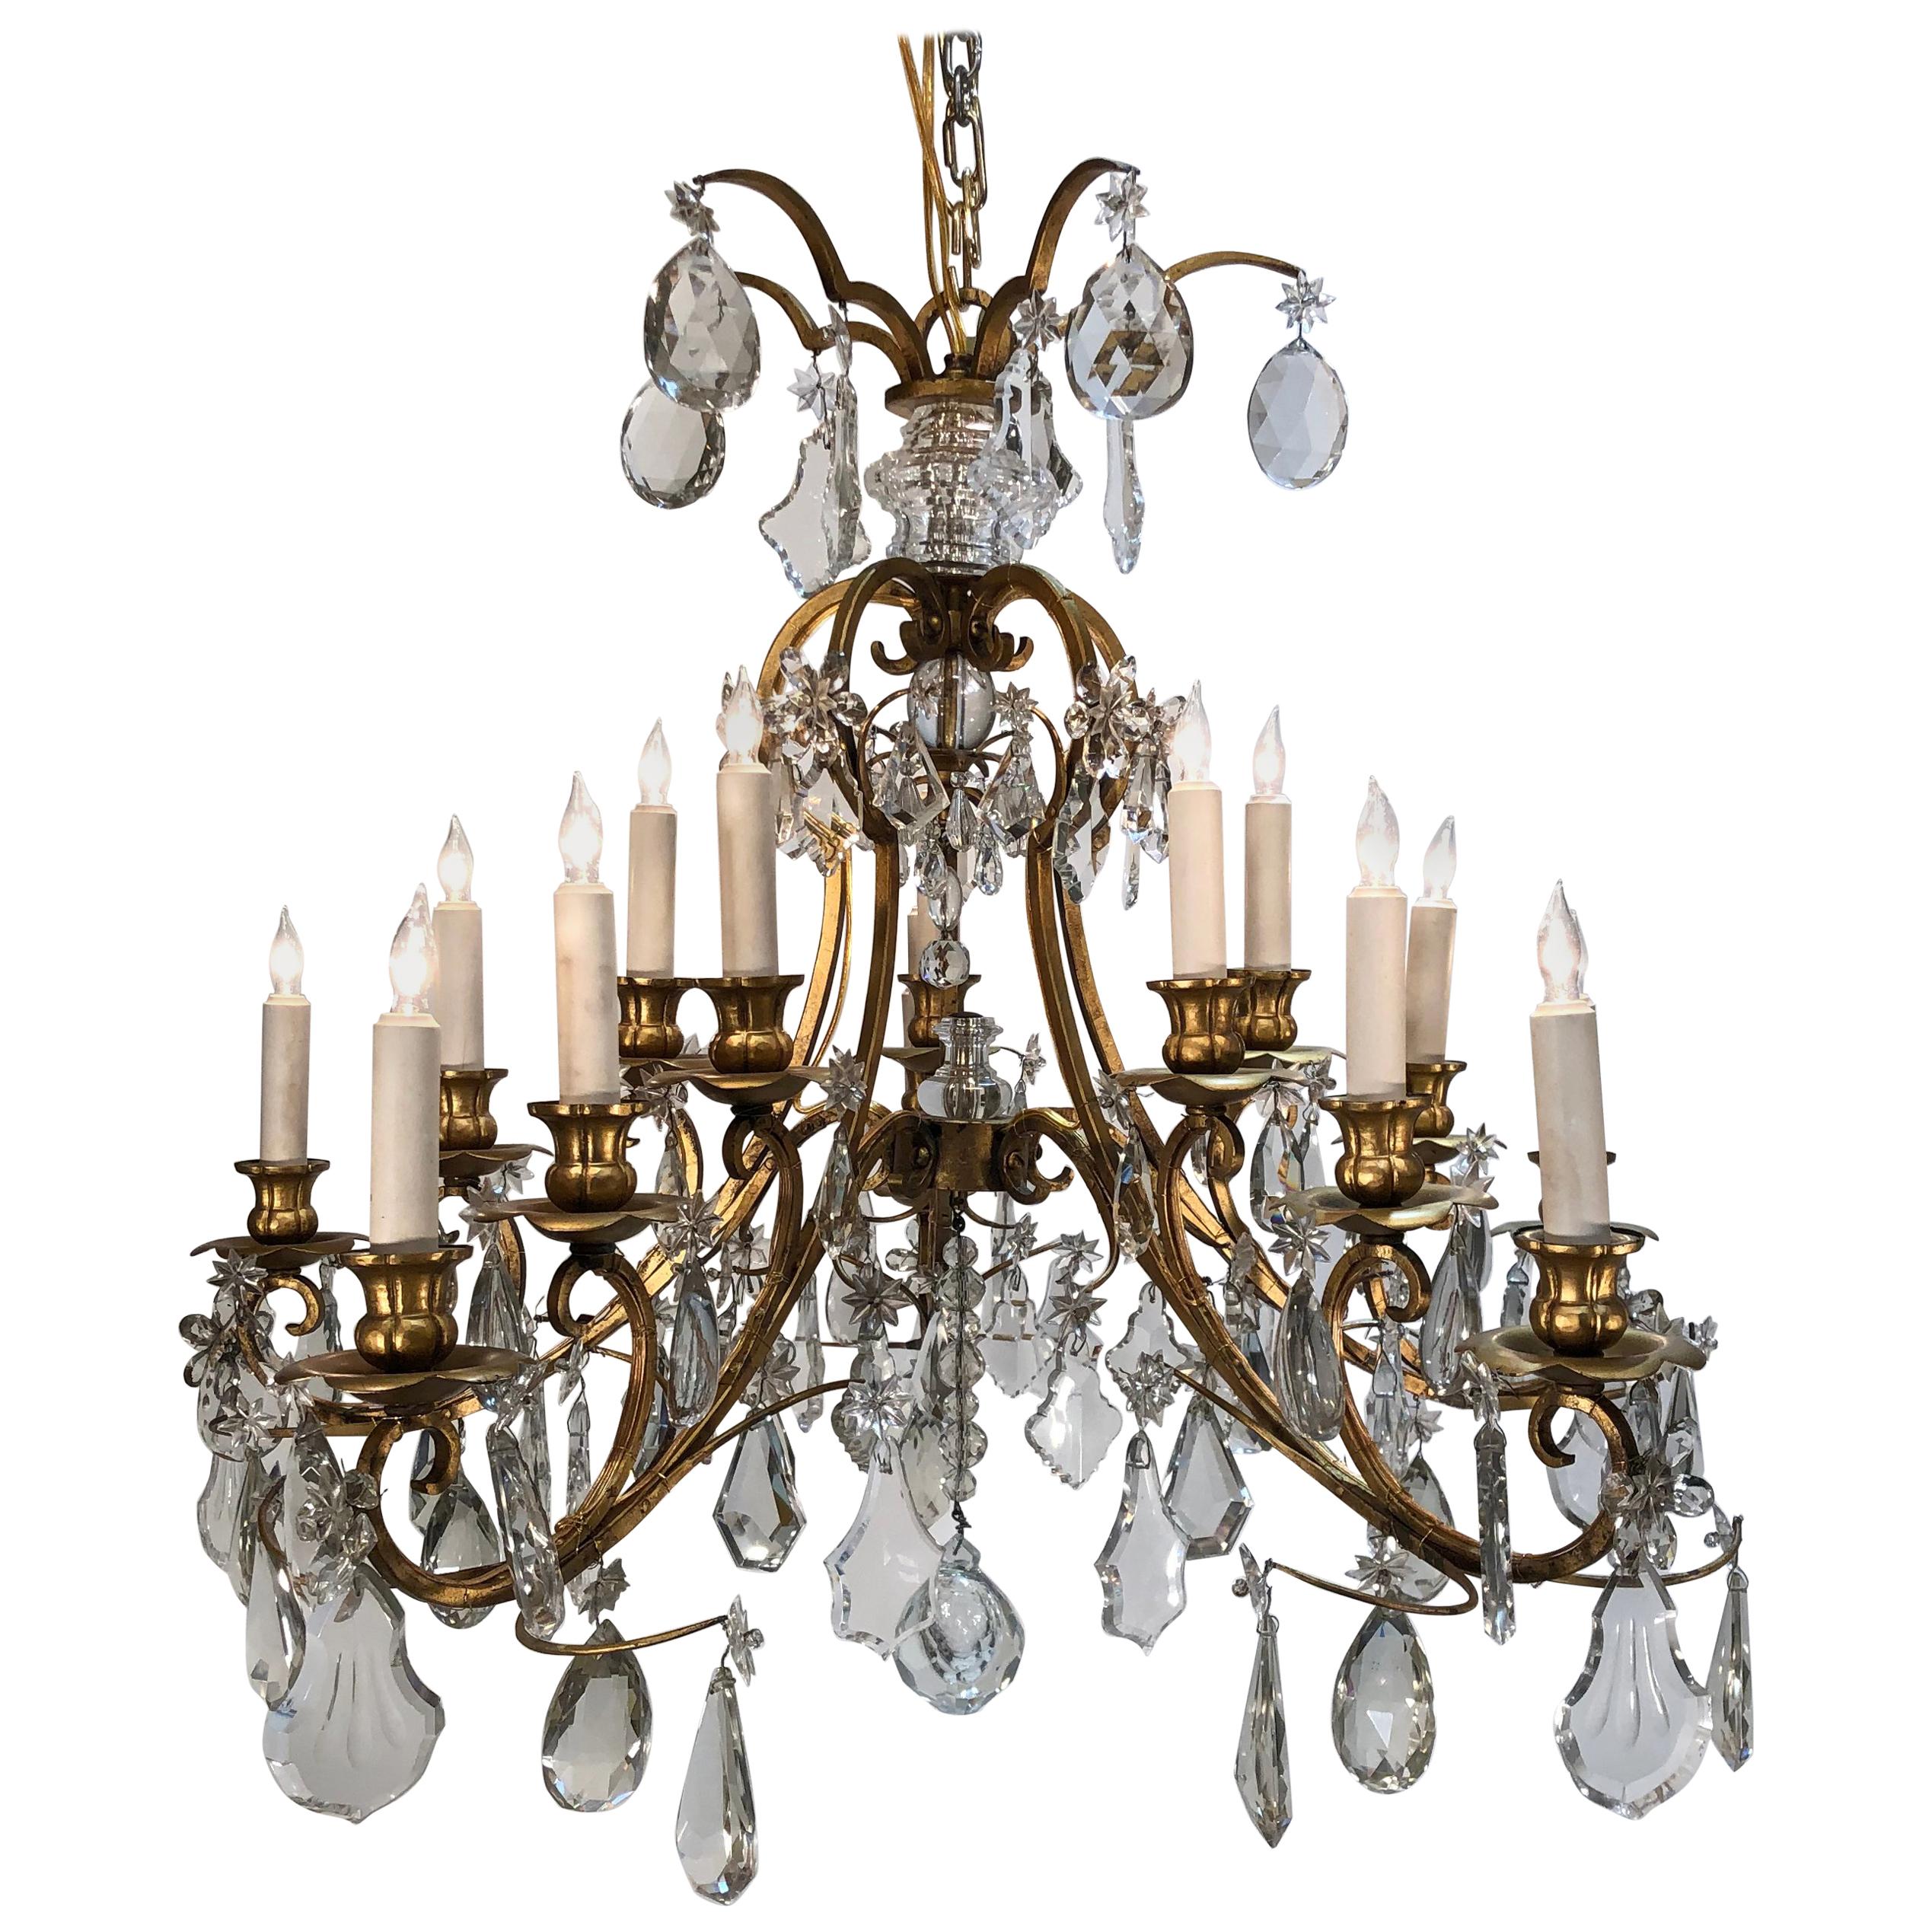 20th Century Gilt Iron and Crystal 15 Light Caldwell Chandelier